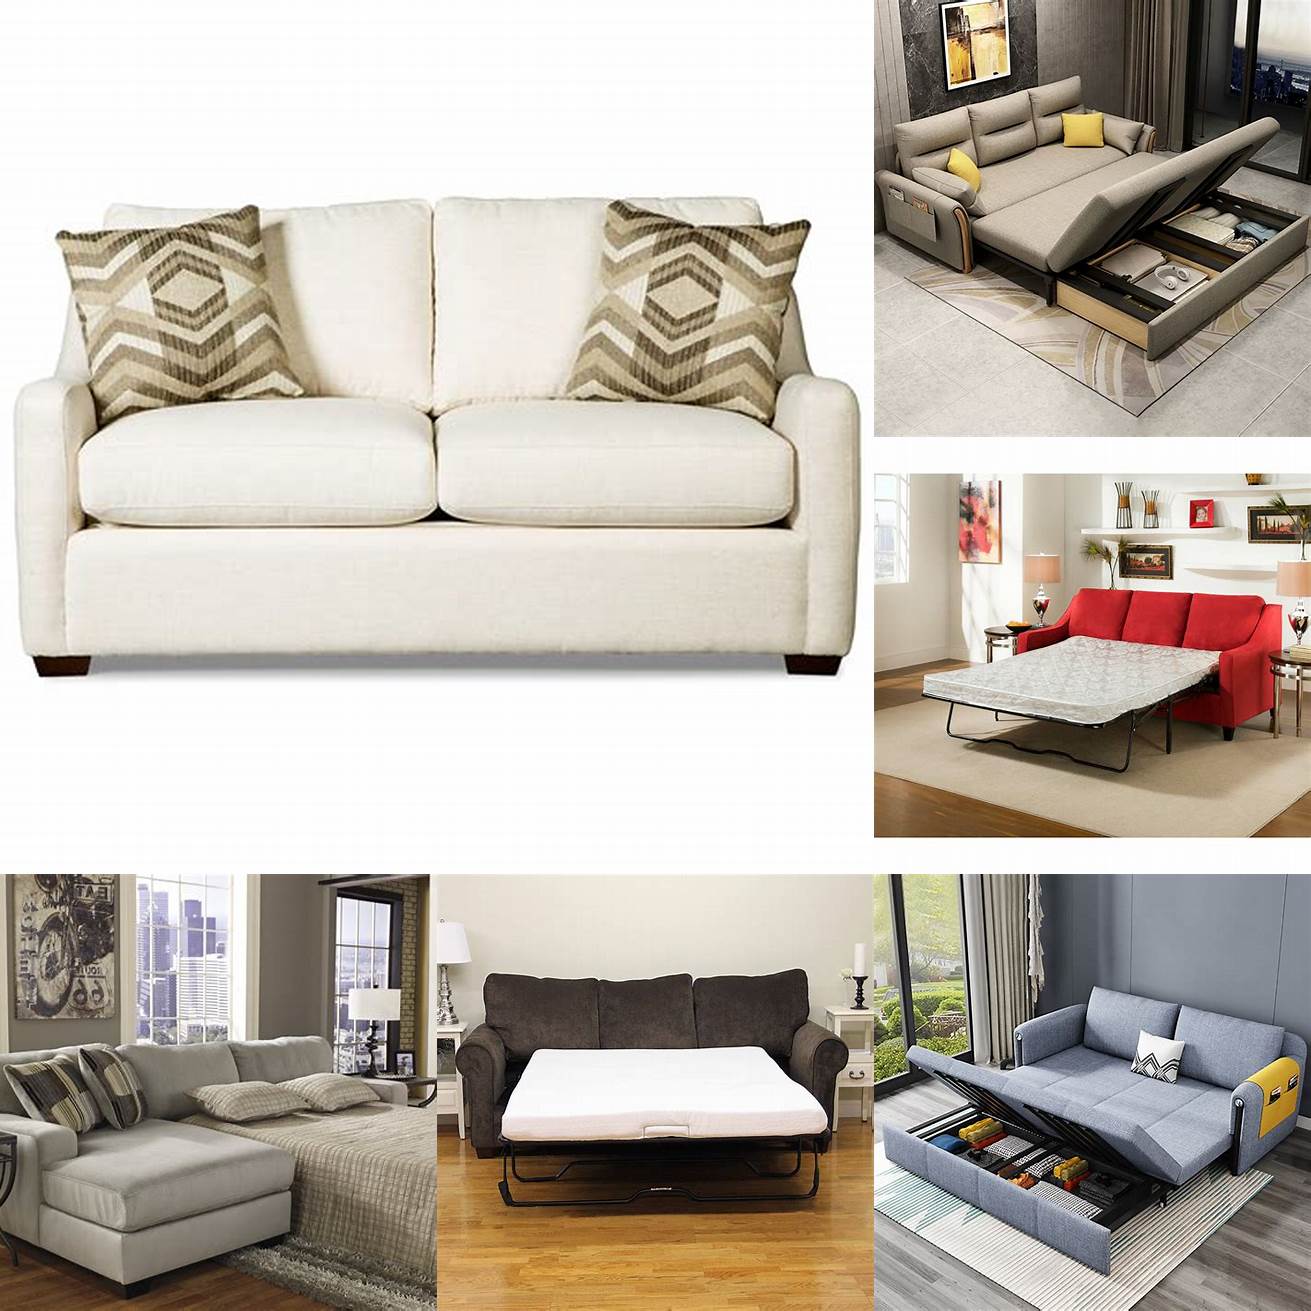 Versatile Full Sleeper Sofas come in a variety of styles and materials